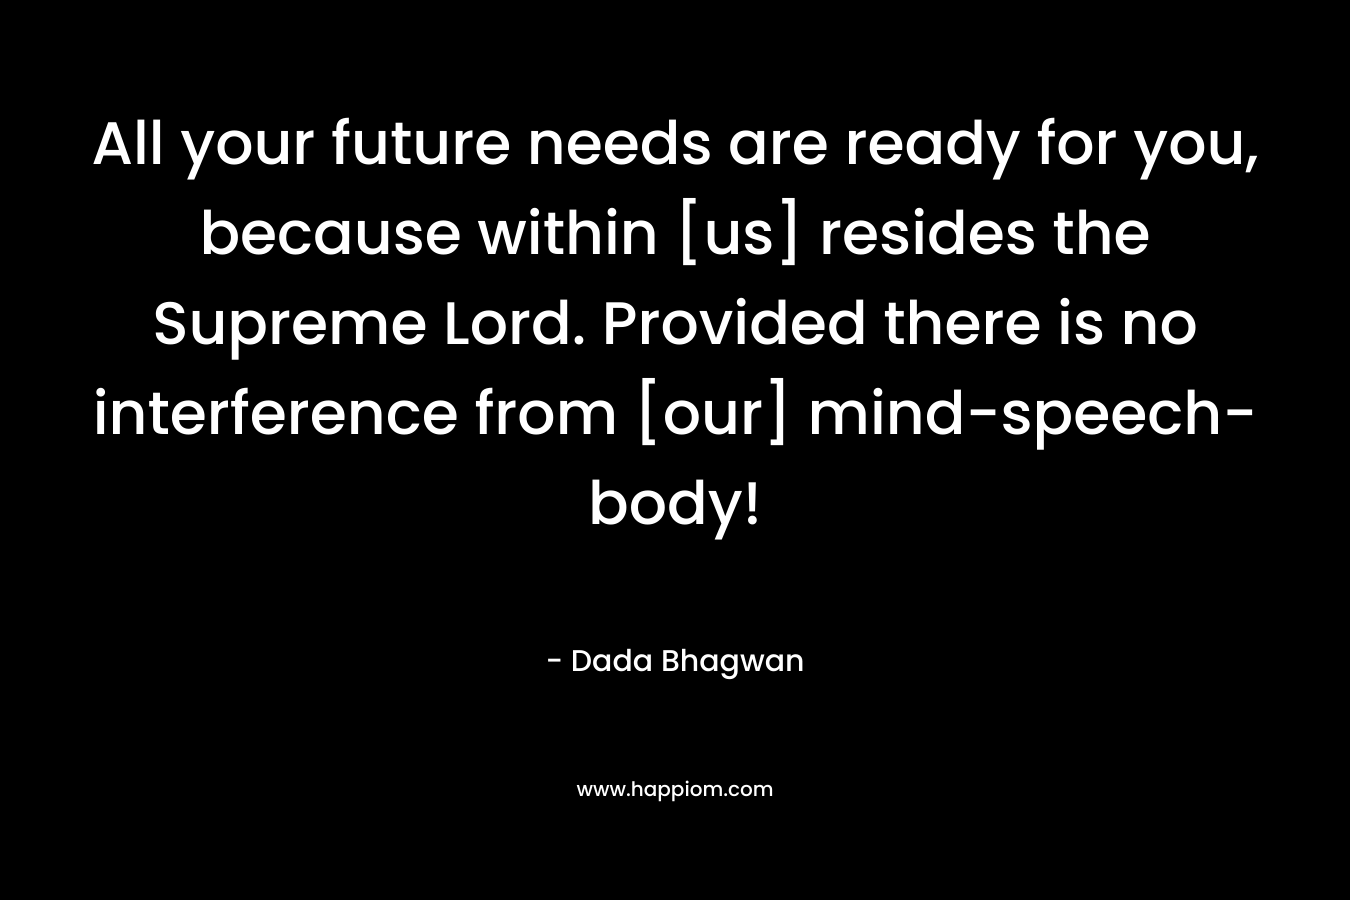 All your future needs are ready for you, because within [us] resides the Supreme Lord. Provided there is no interference from [our] mind-speech-body! – Dada Bhagwan